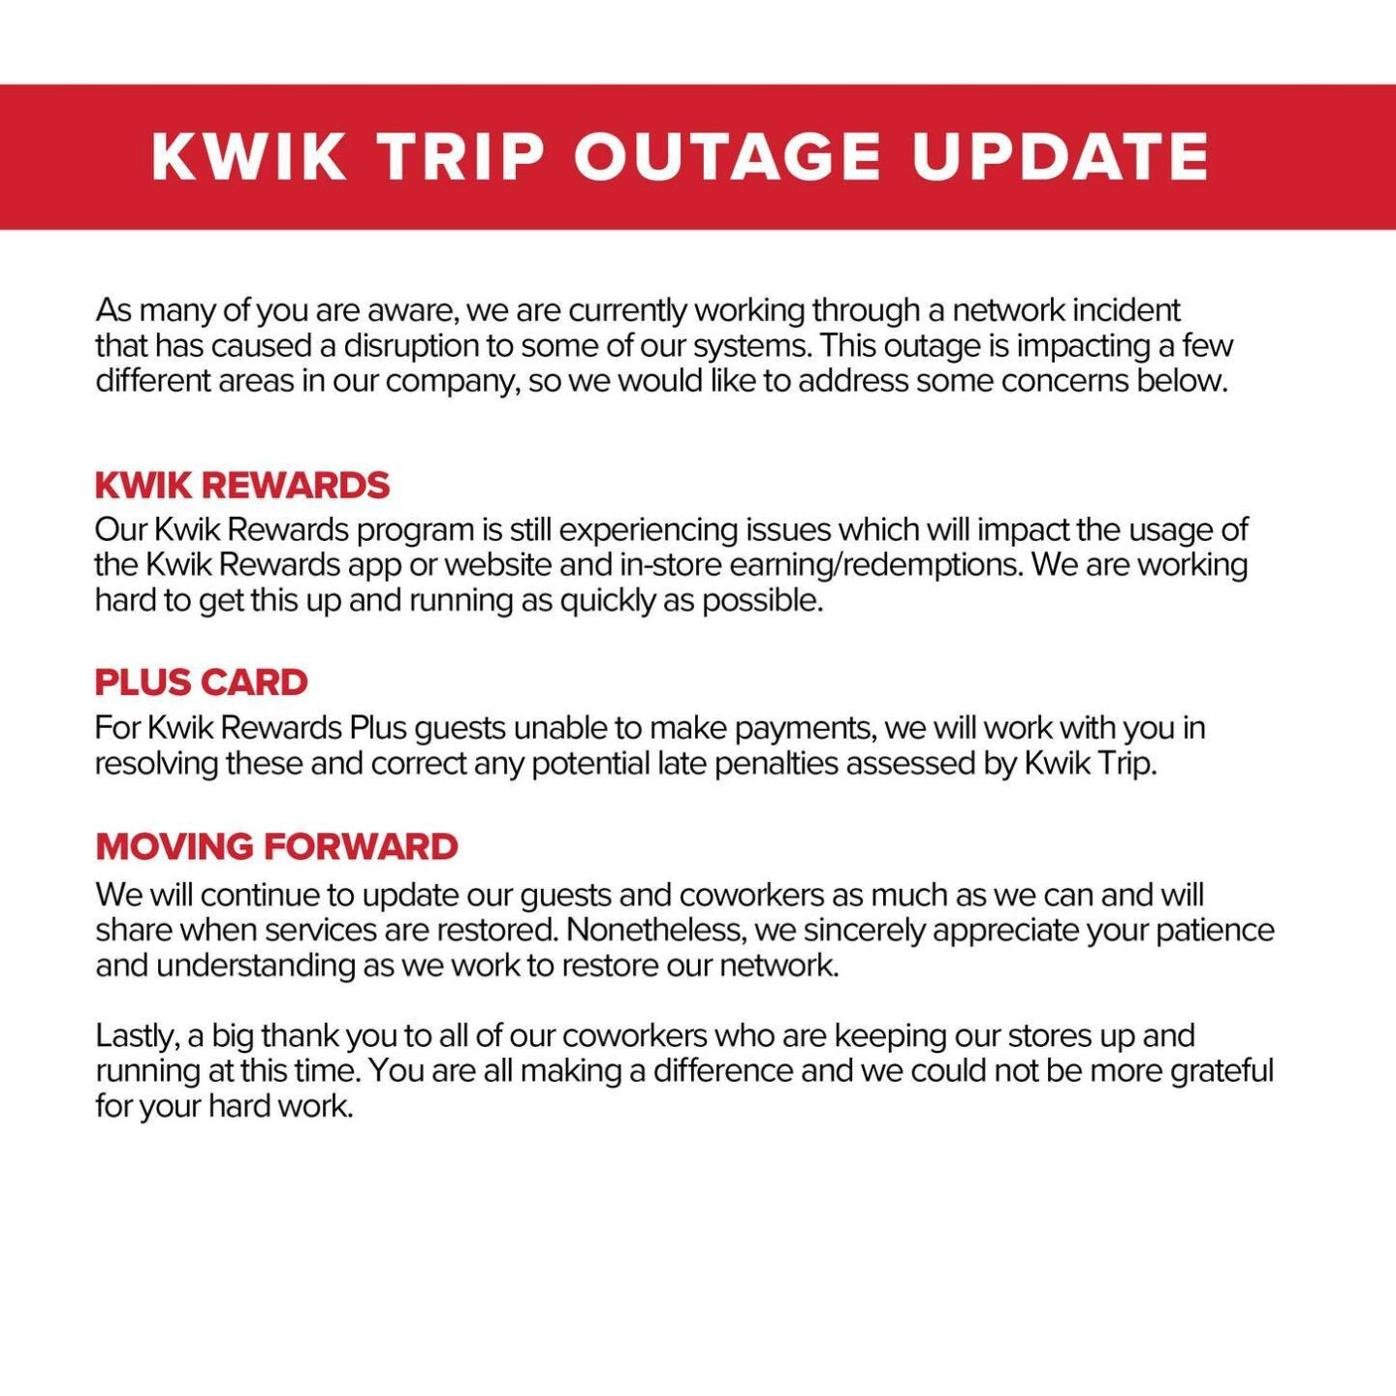 The Easiest Way To Check Your Kwik Trip Gift Card Balance